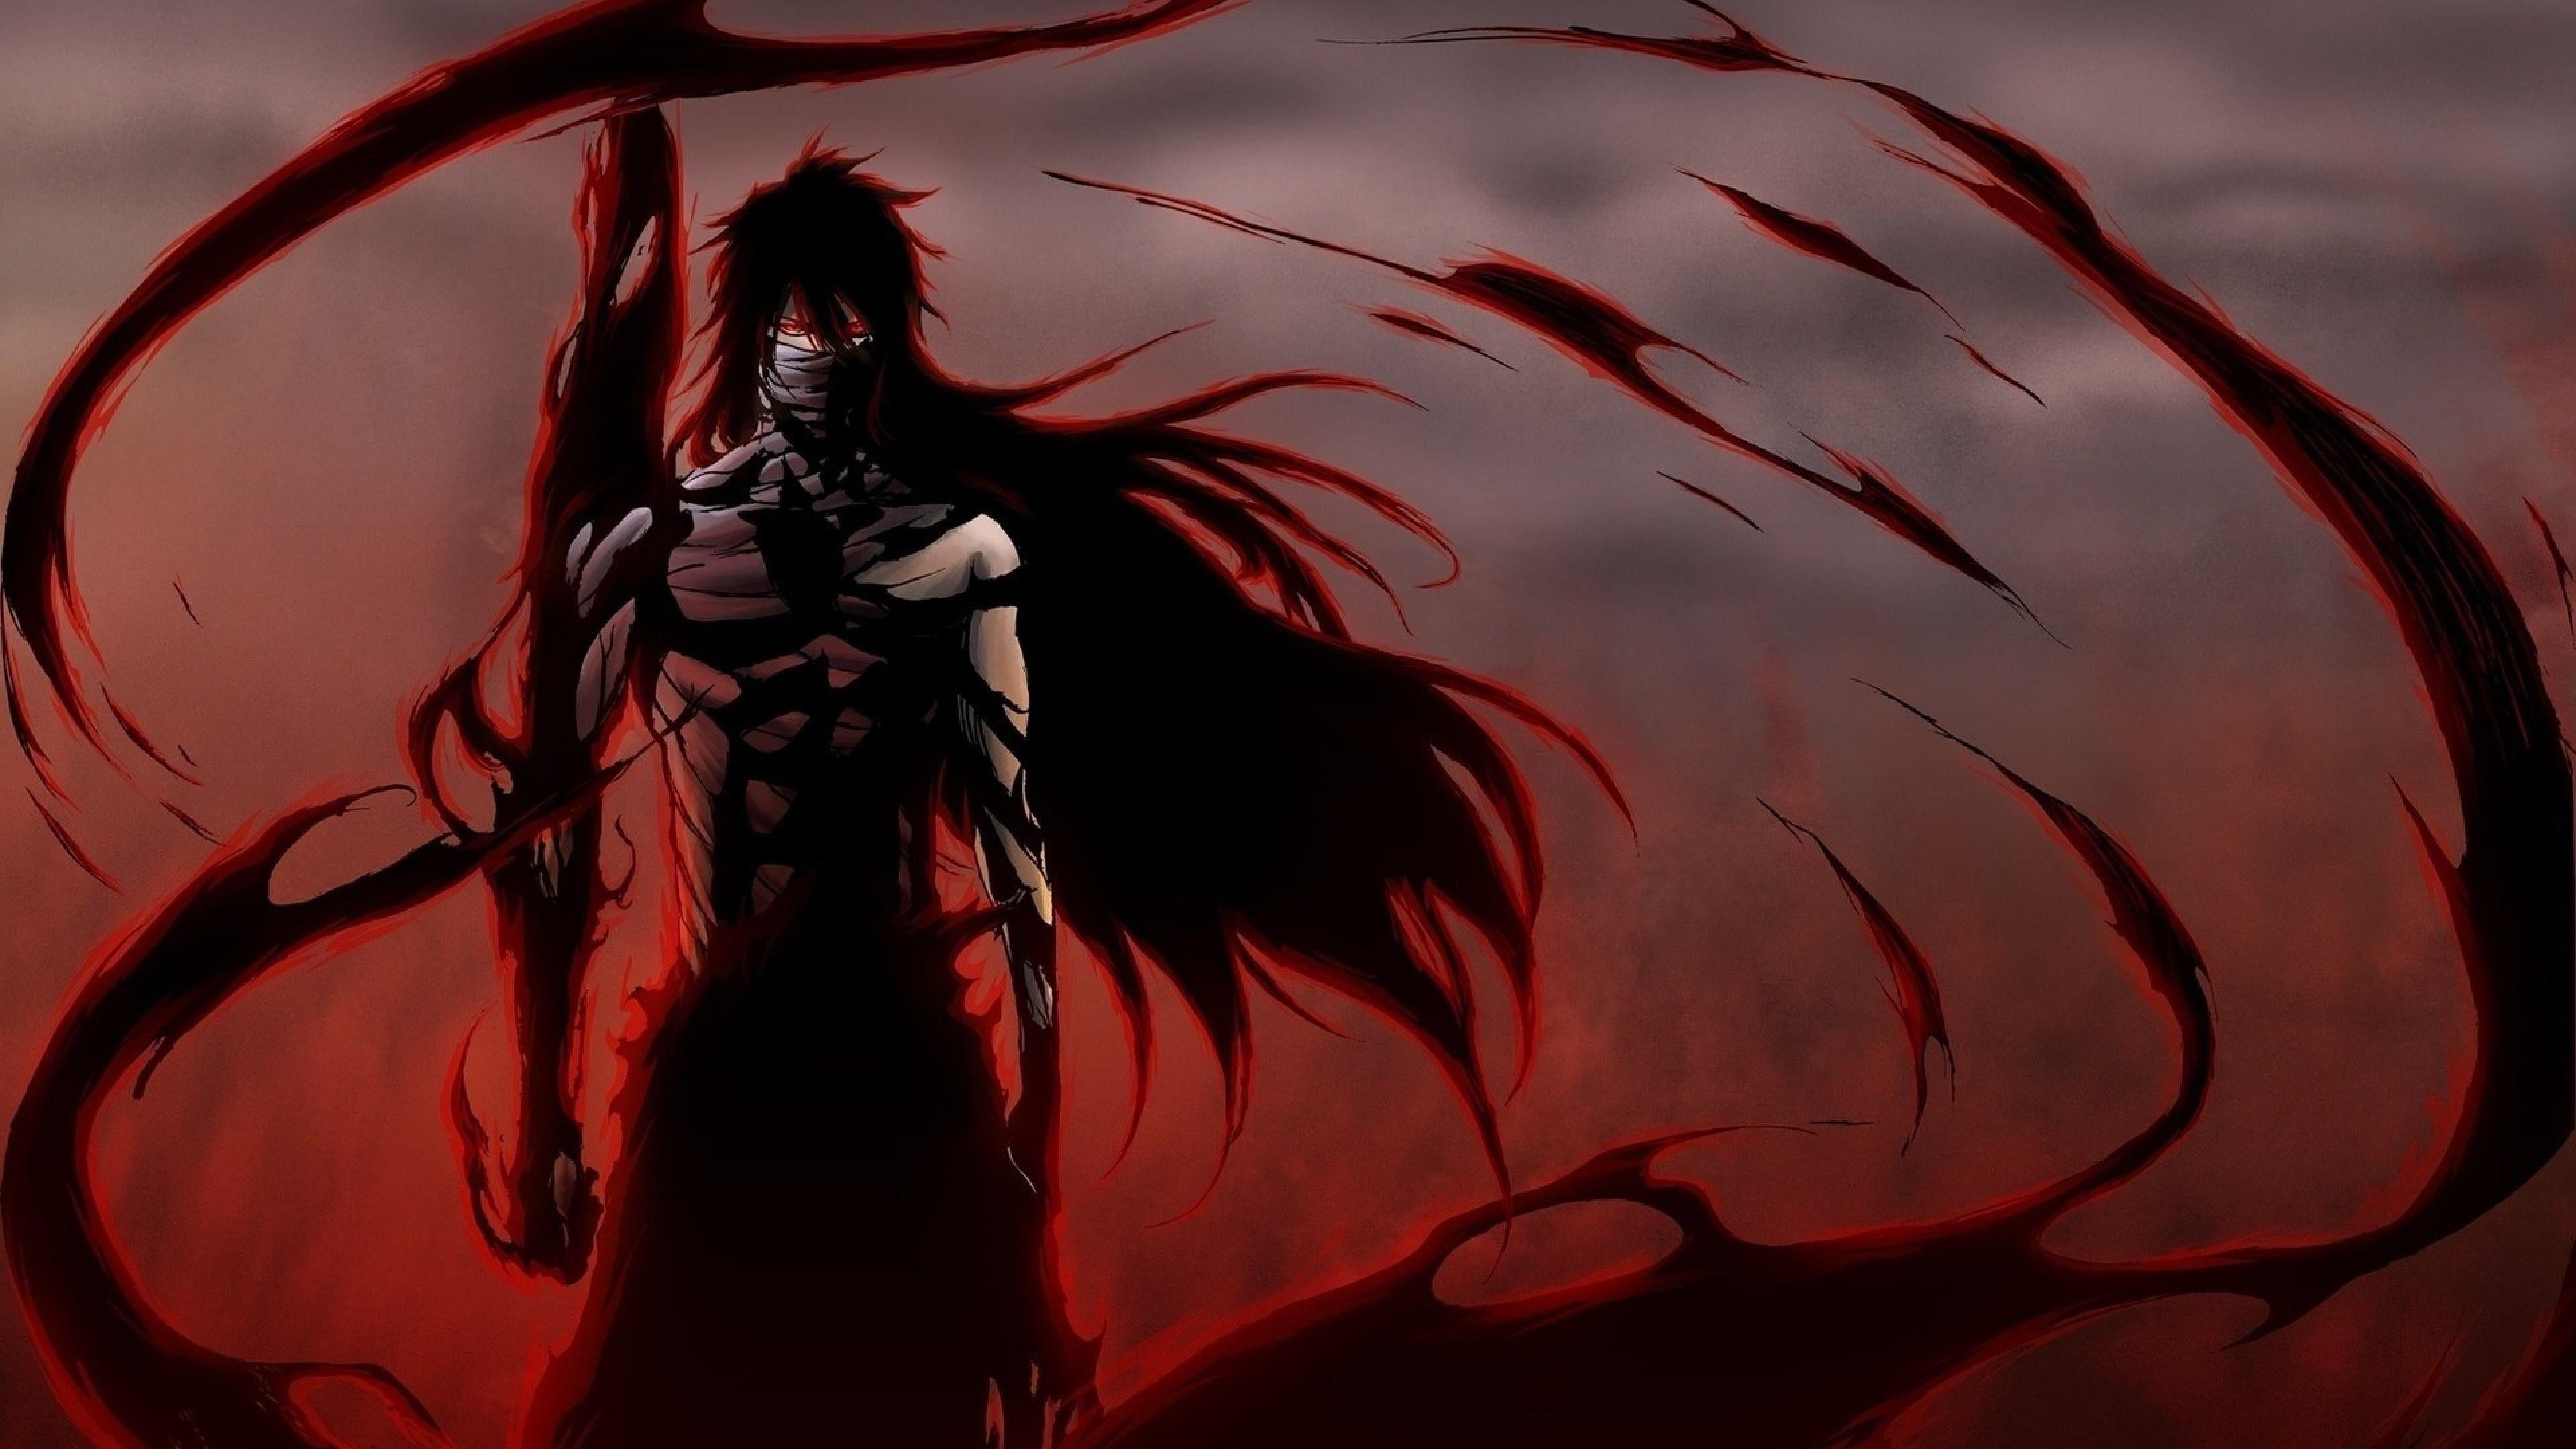 Black And Red Anime Wallpapers - Top Free Black And Red Anime